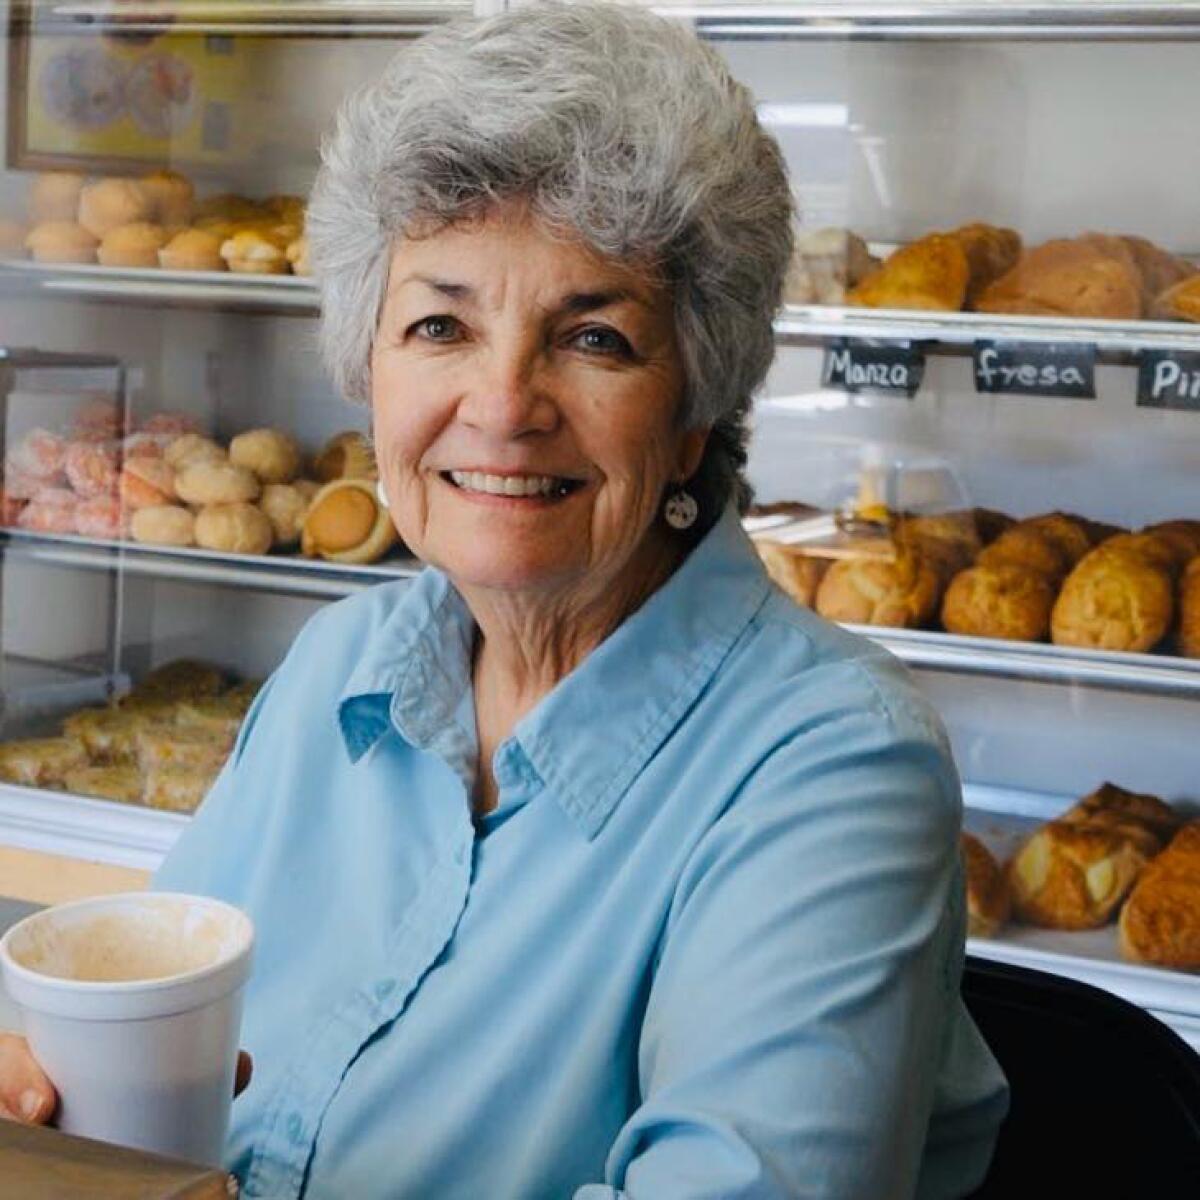 A smiling woman holds a cup near a display of baked goods